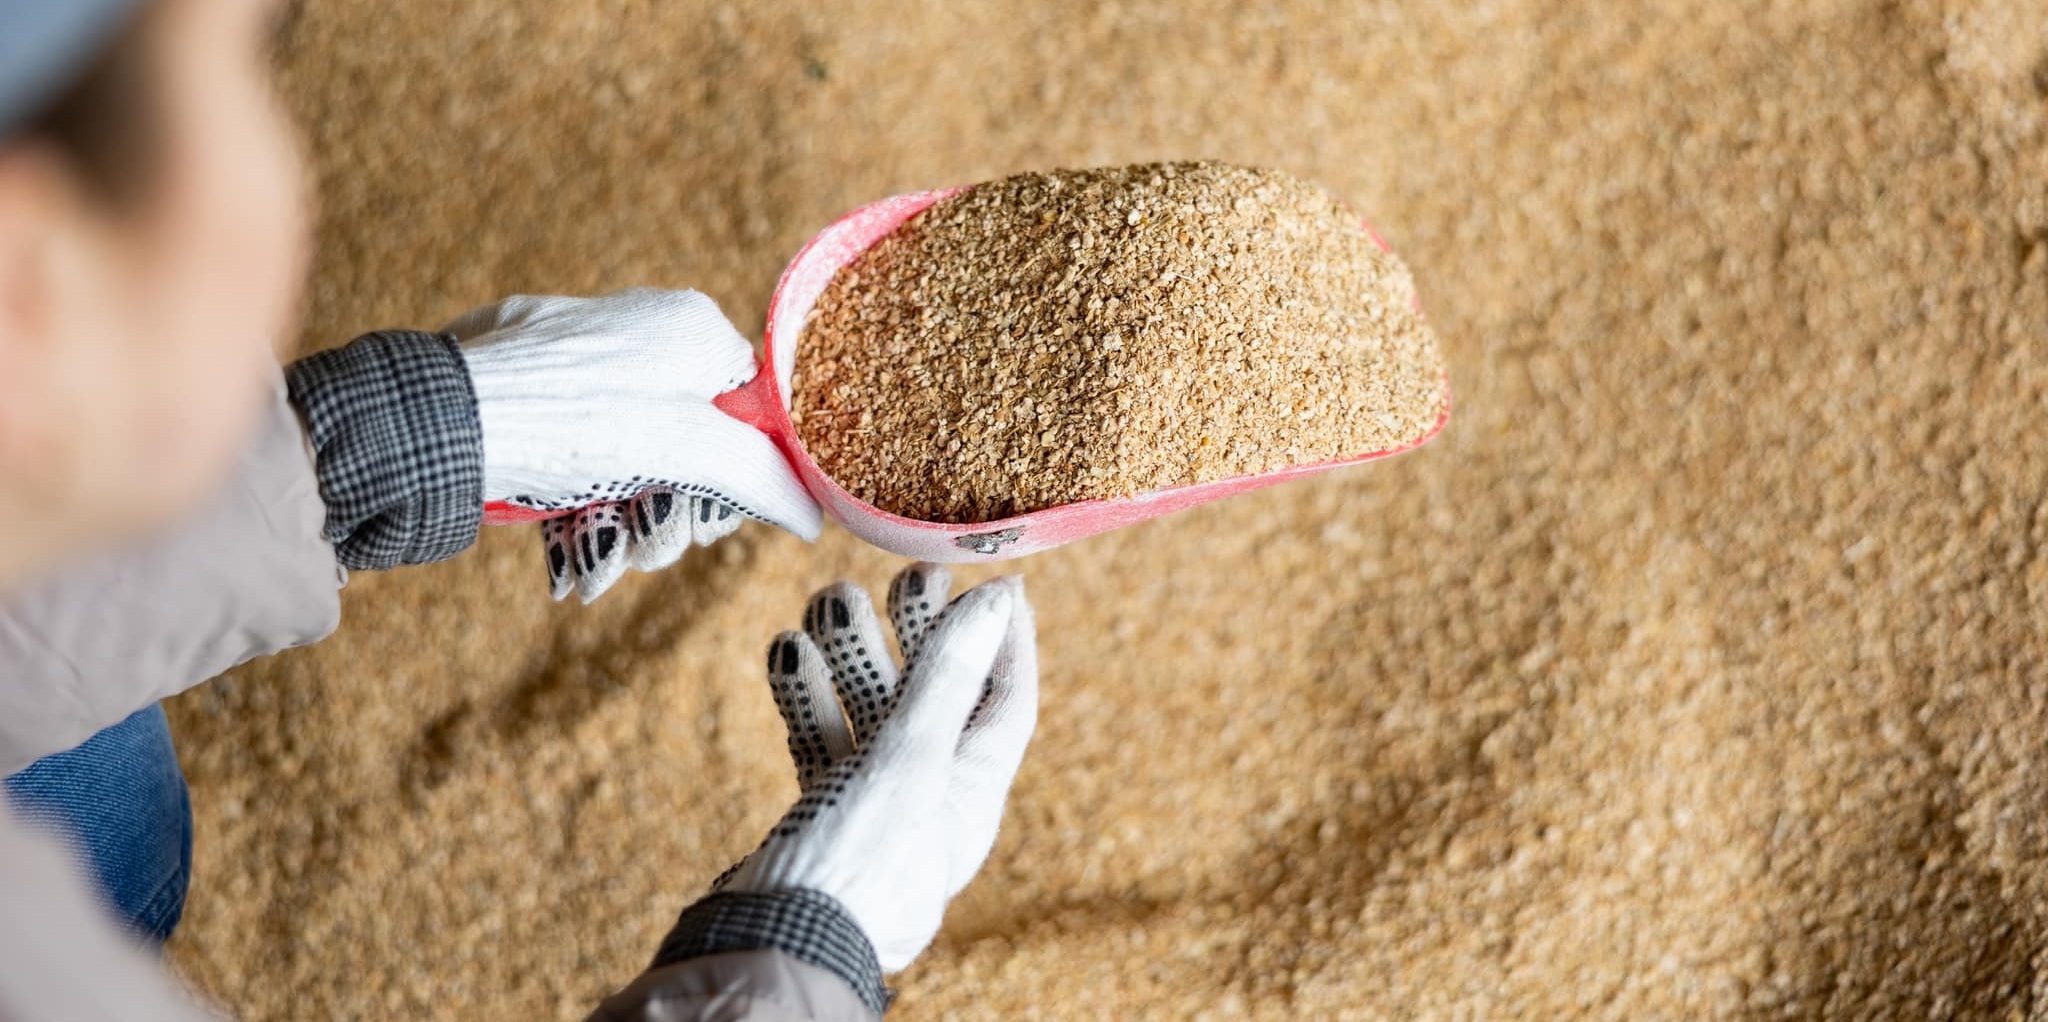 person with hat and two gloved hands holds a scoop of feed supplement over a large amount of the same feed supplement